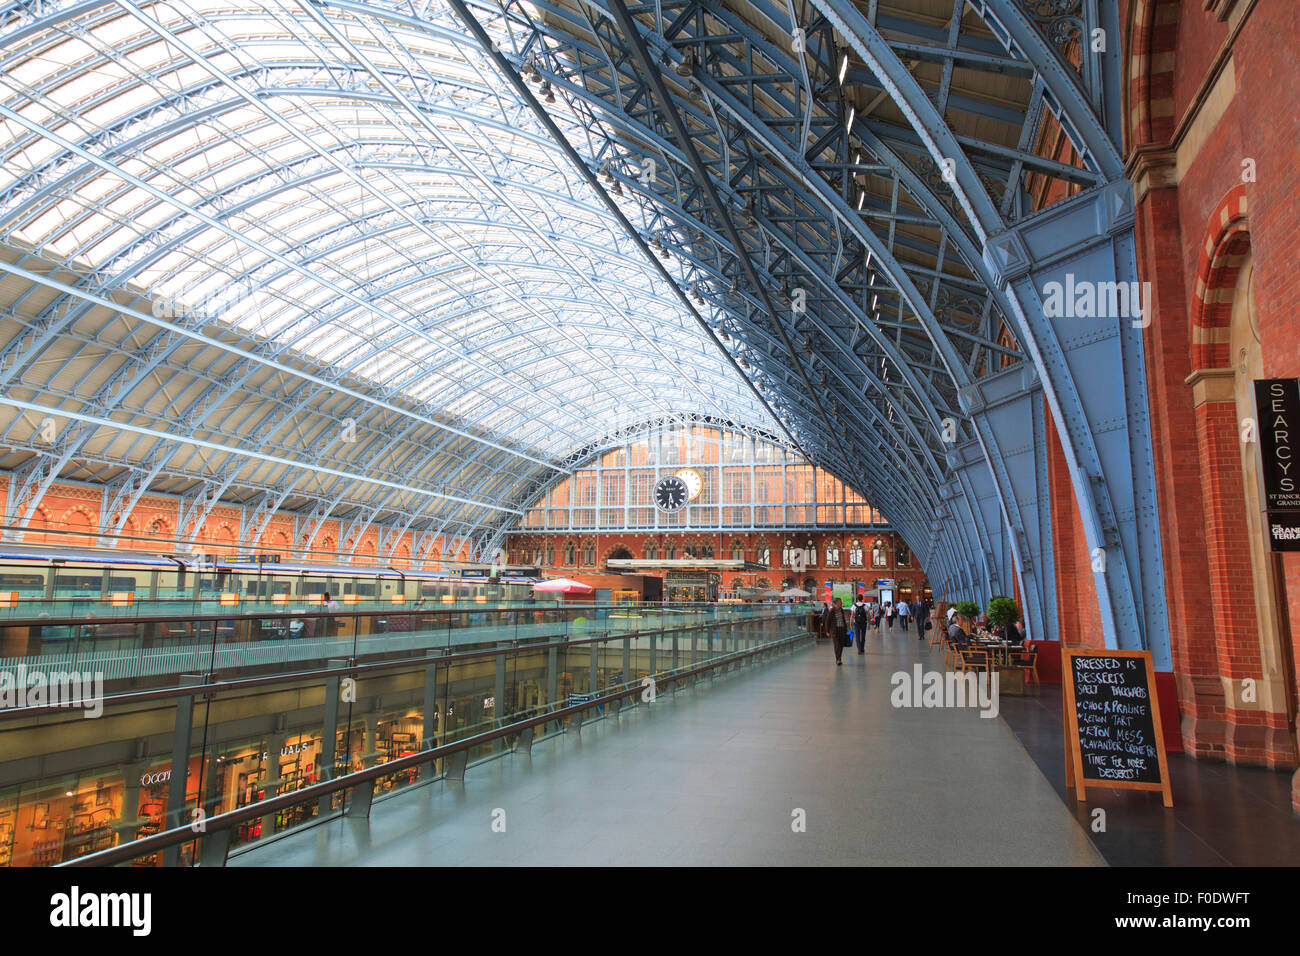 Inside the grade 1 listed St Pancras Railway Station with glazed roof Stock Photo